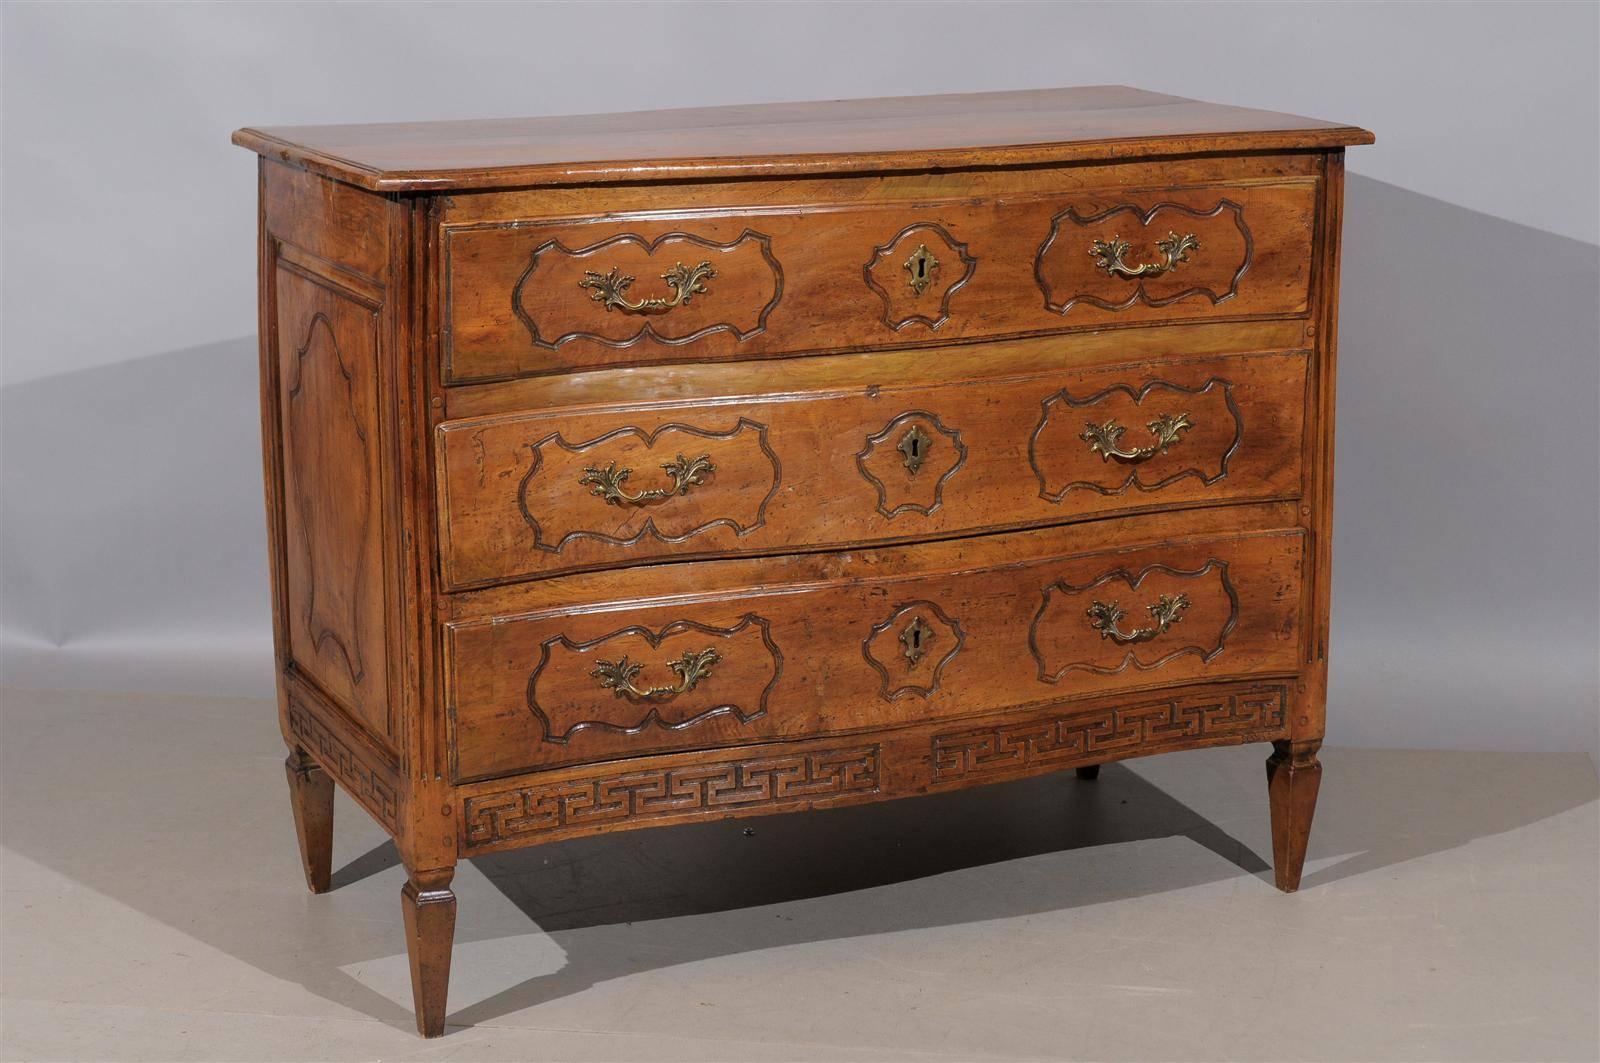 An Italian transitional walnut commode with serpentine front, three drawers and Greek key on apron with fluted sides and tapering legs.

